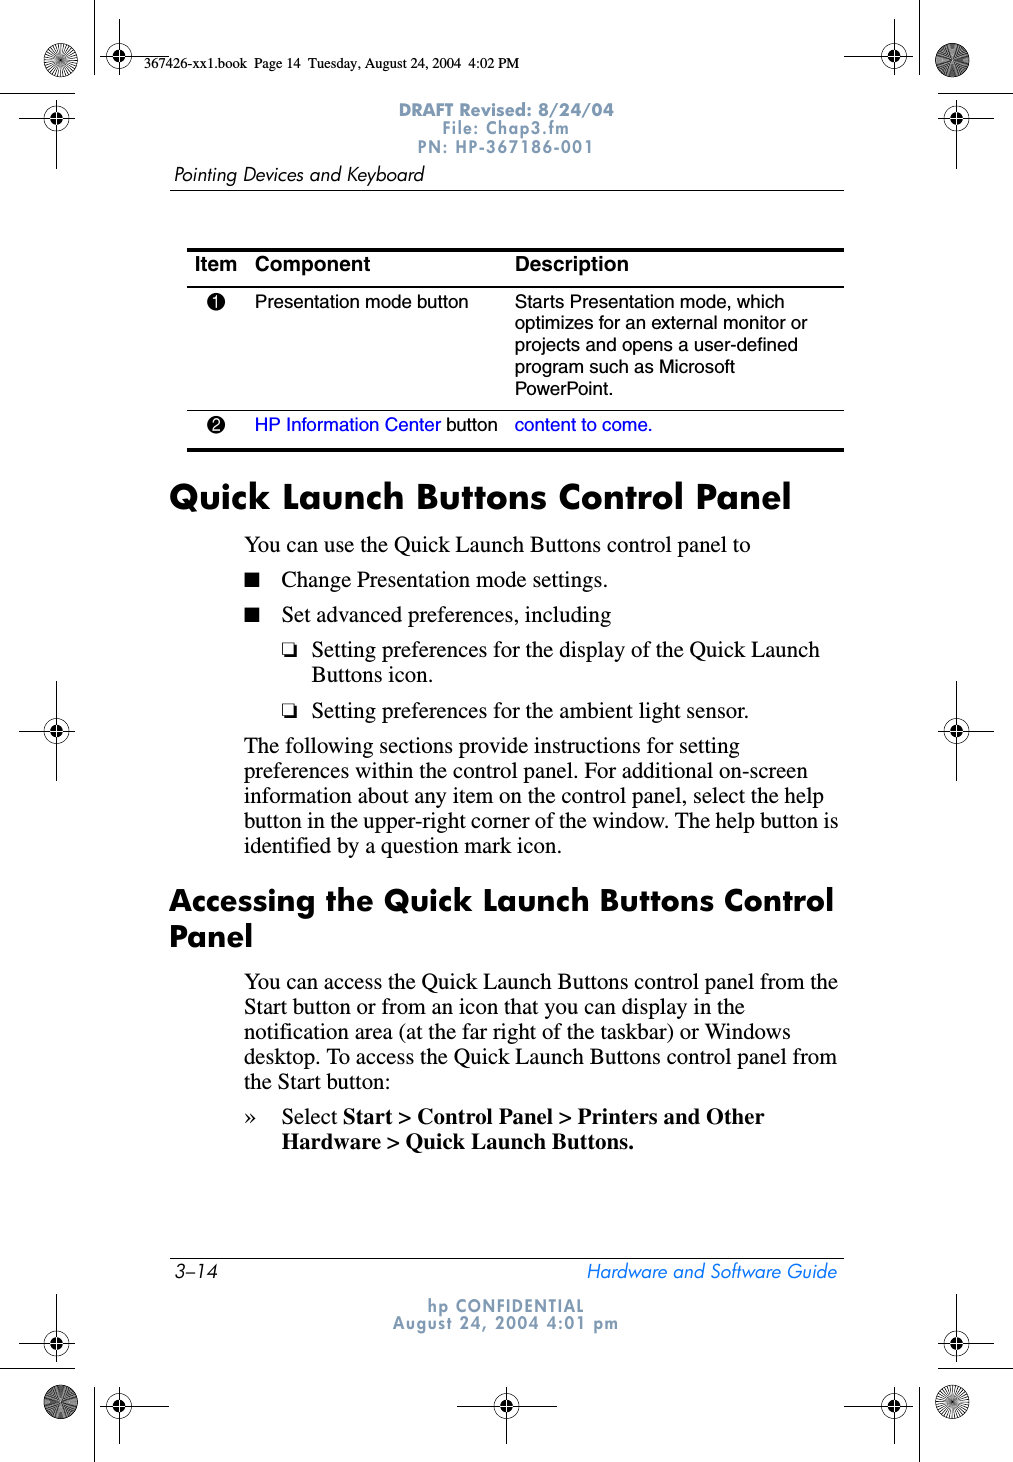 3–14 Hardware and Software GuidePointing Devices and KeyboardDRAFT Revised: 8/24/04File: Chap3.fm PN: HP-367186-001 hp CONFIDENTIALAugust 24, 2004 4:01 pmQuick Launch Buttons Control PanelYou can use the Quick Launch Buttons control panel to■Change Presentation mode settings.■Set advanced preferences, including❏Setting preferences for the display of the Quick Launch Buttons icon.❏Setting preferences for the ambient light sensor.The following sections provide instructions for setting preferences within the control panel. For additional on-screen information about any item on the control panel, select the help button in the upper-right corner of the window. The help button is identified by a question mark icon.Accessing the Quick Launch Buttons Control PanelYou can access the Quick Launch Buttons control panel from the Start button or from an icon that you can display in the notification area (at the far right of the taskbar) or Windows desktop. To access the Quick Launch Buttons control panel from the Start button: »Select Start &gt; Control Panel &gt; Printers and Other Hardware &gt; Quick Launch Buttons.Item Component Description1Presentation mode button  Starts Presentation mode, which optimizes for an external monitor or projects and opens a user-defined program such as Microsoft PowerPoint.2HP Information Center button content to come.367426-xx1.book  Page 14  Tuesday, August 24, 2004  4:02 PM